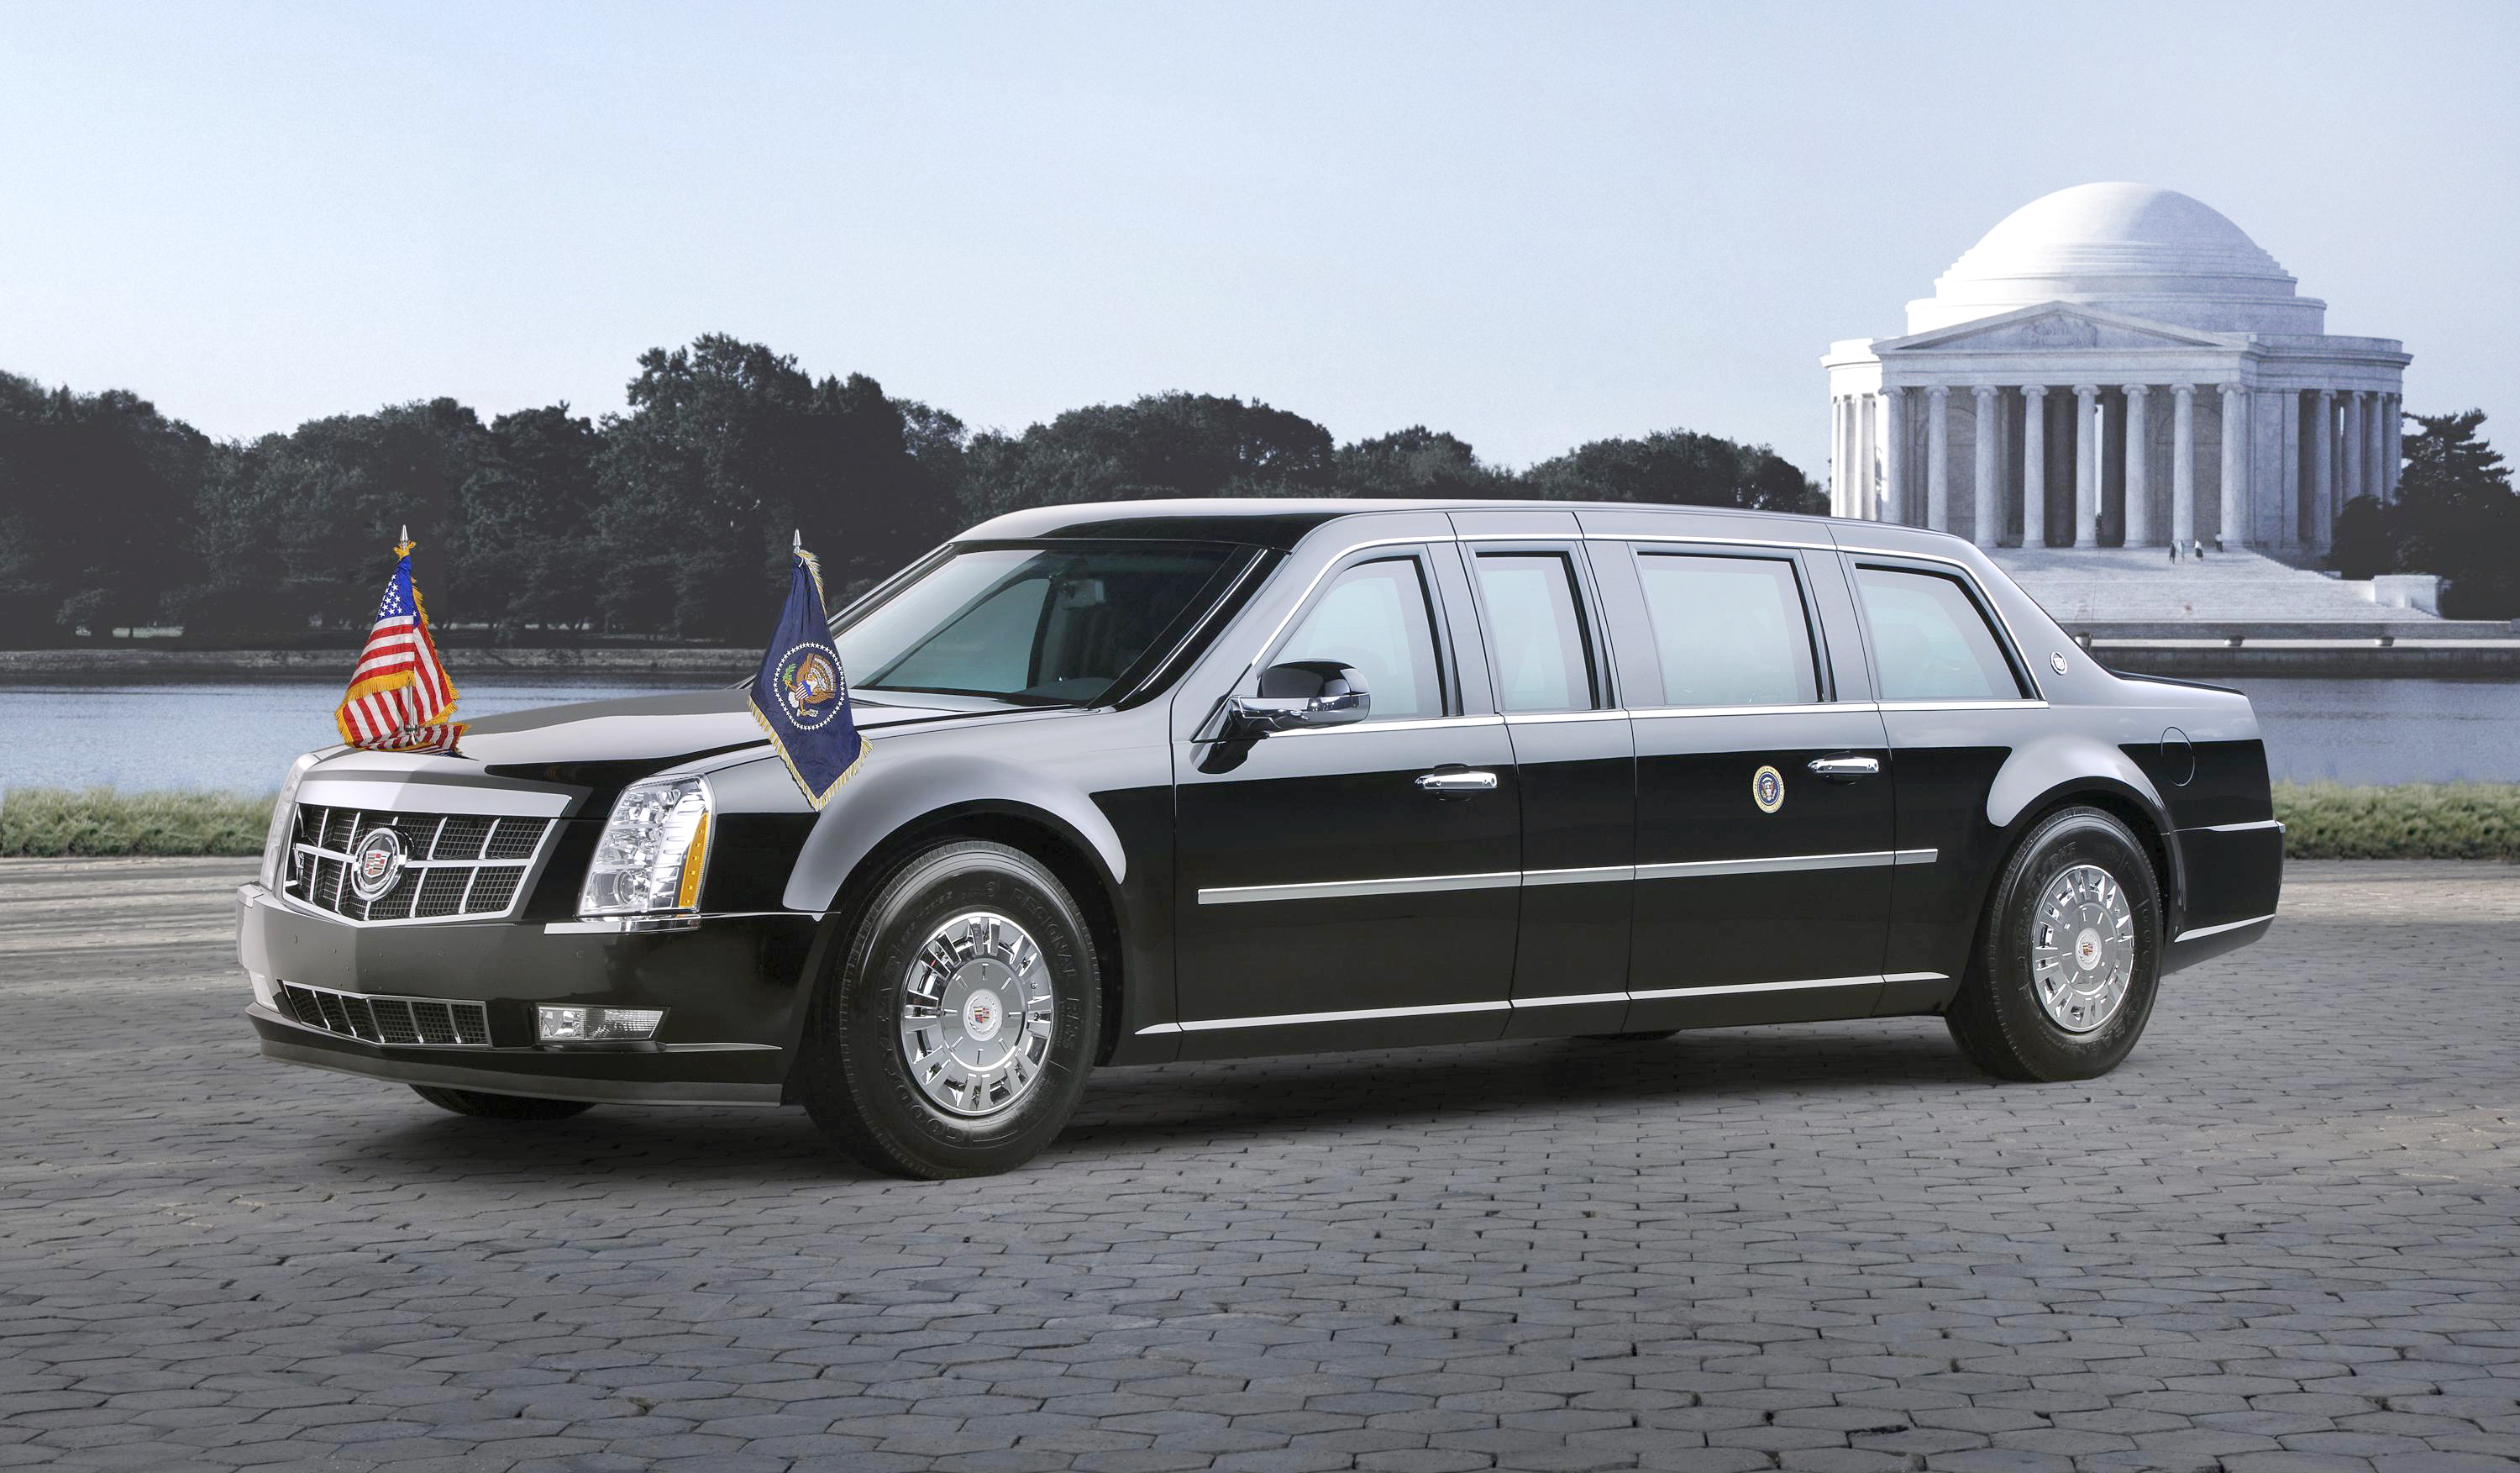 Is this a Car or armored! Know everything about President Trump's car